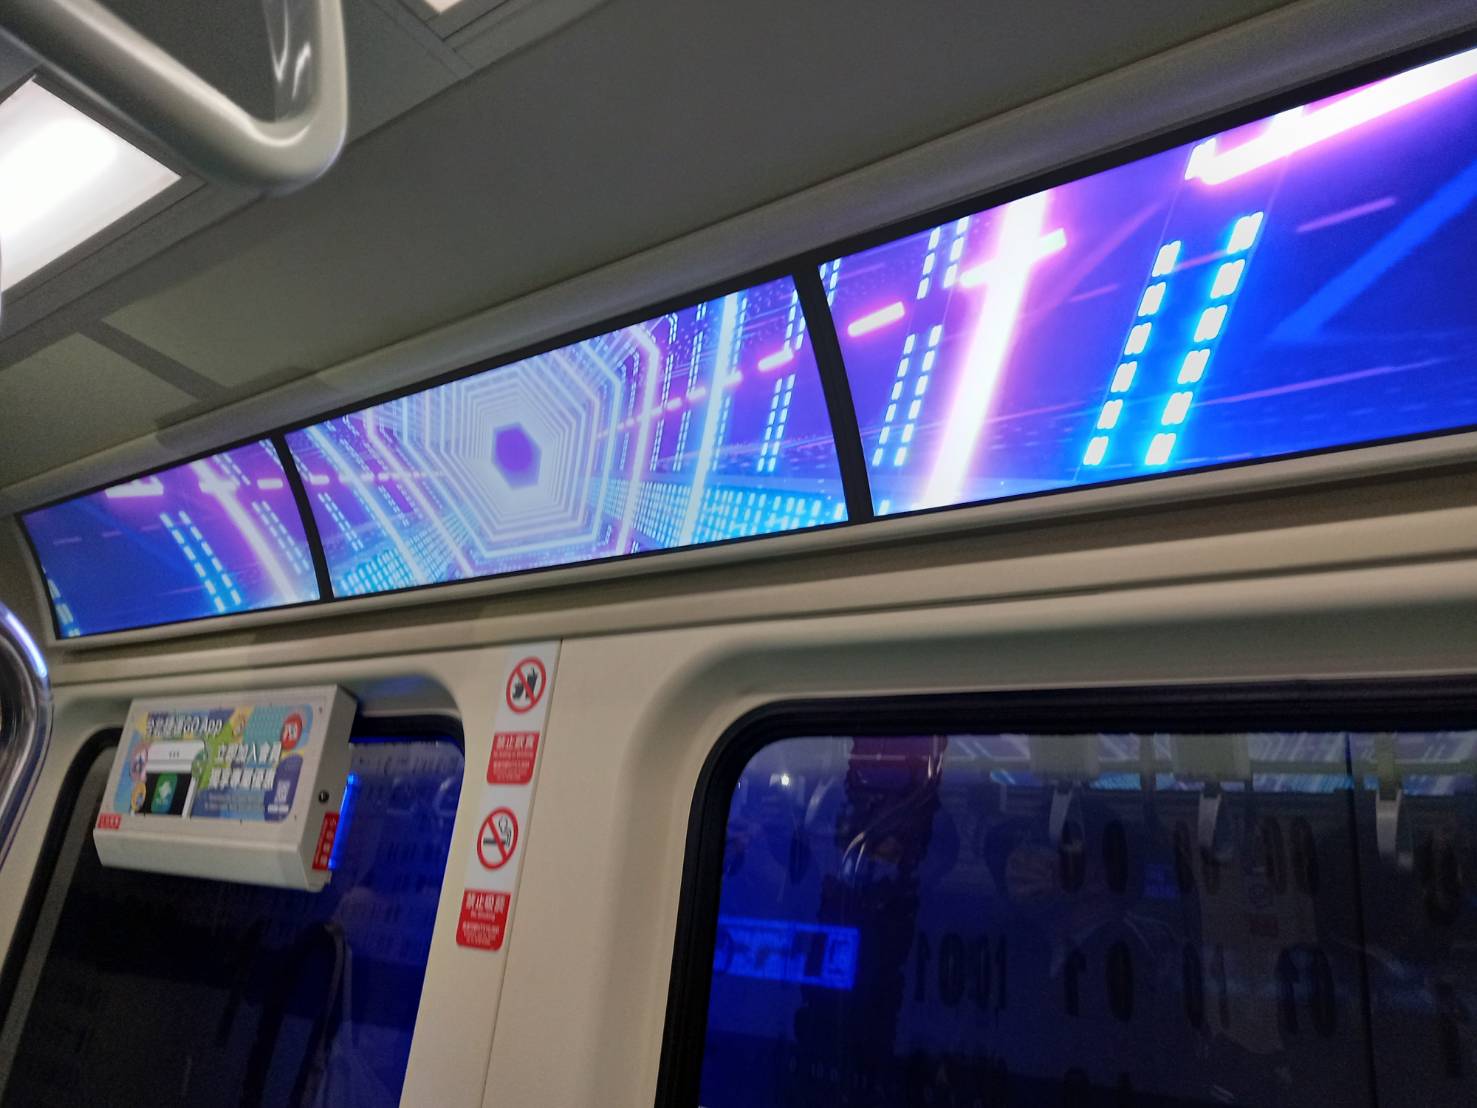 Taipei Rapid Transit Corporation launched Pokemon MRT Train with mart panel and displays. (Photo / Provided by Taipei City Government)